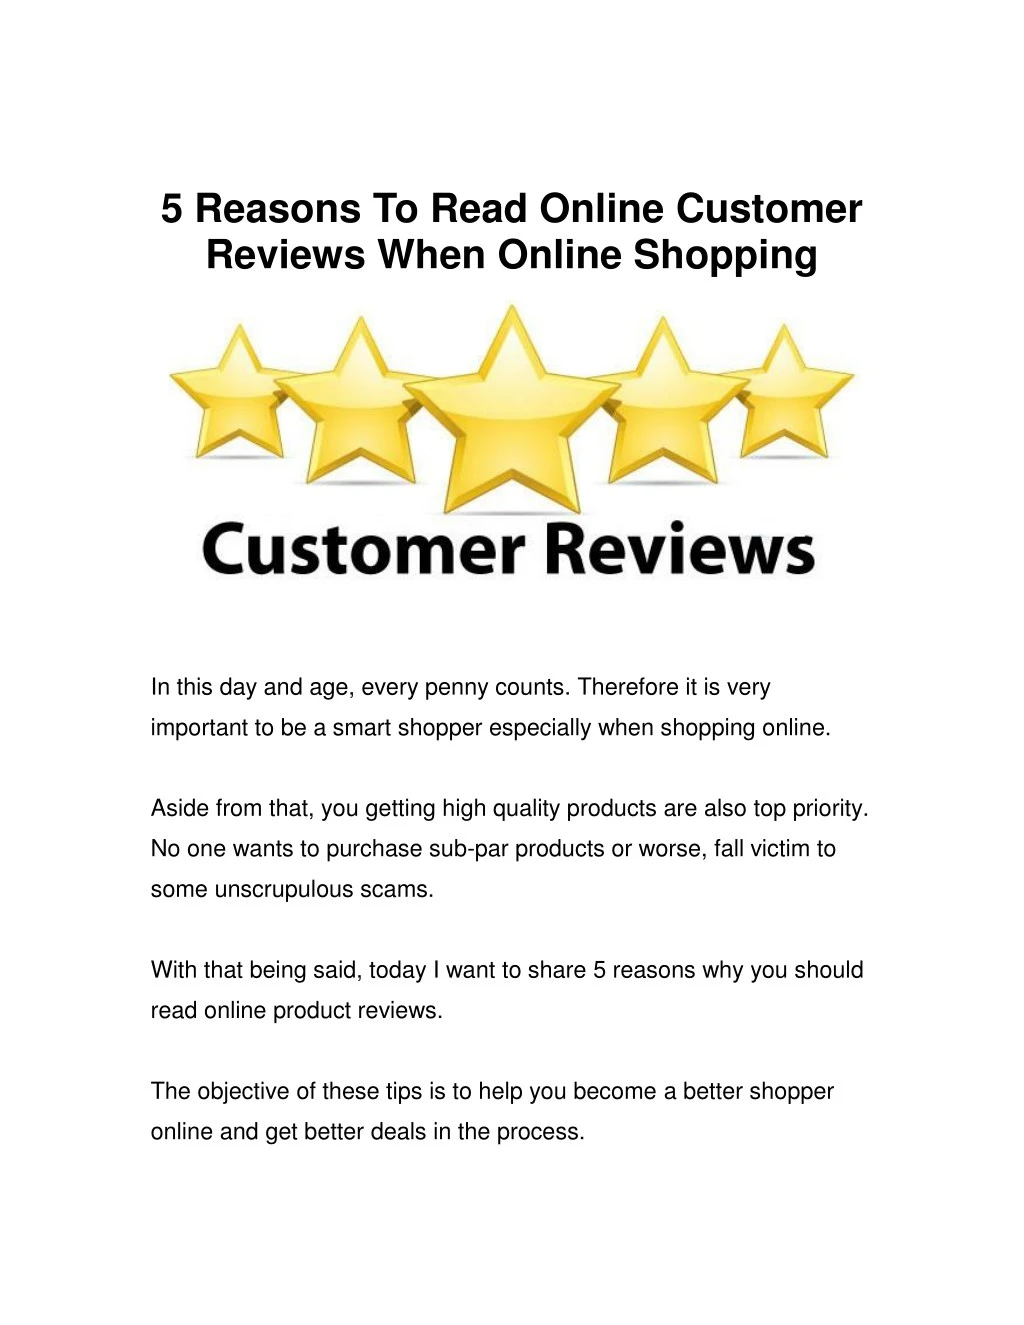 5 reasons to read online customer reviews when